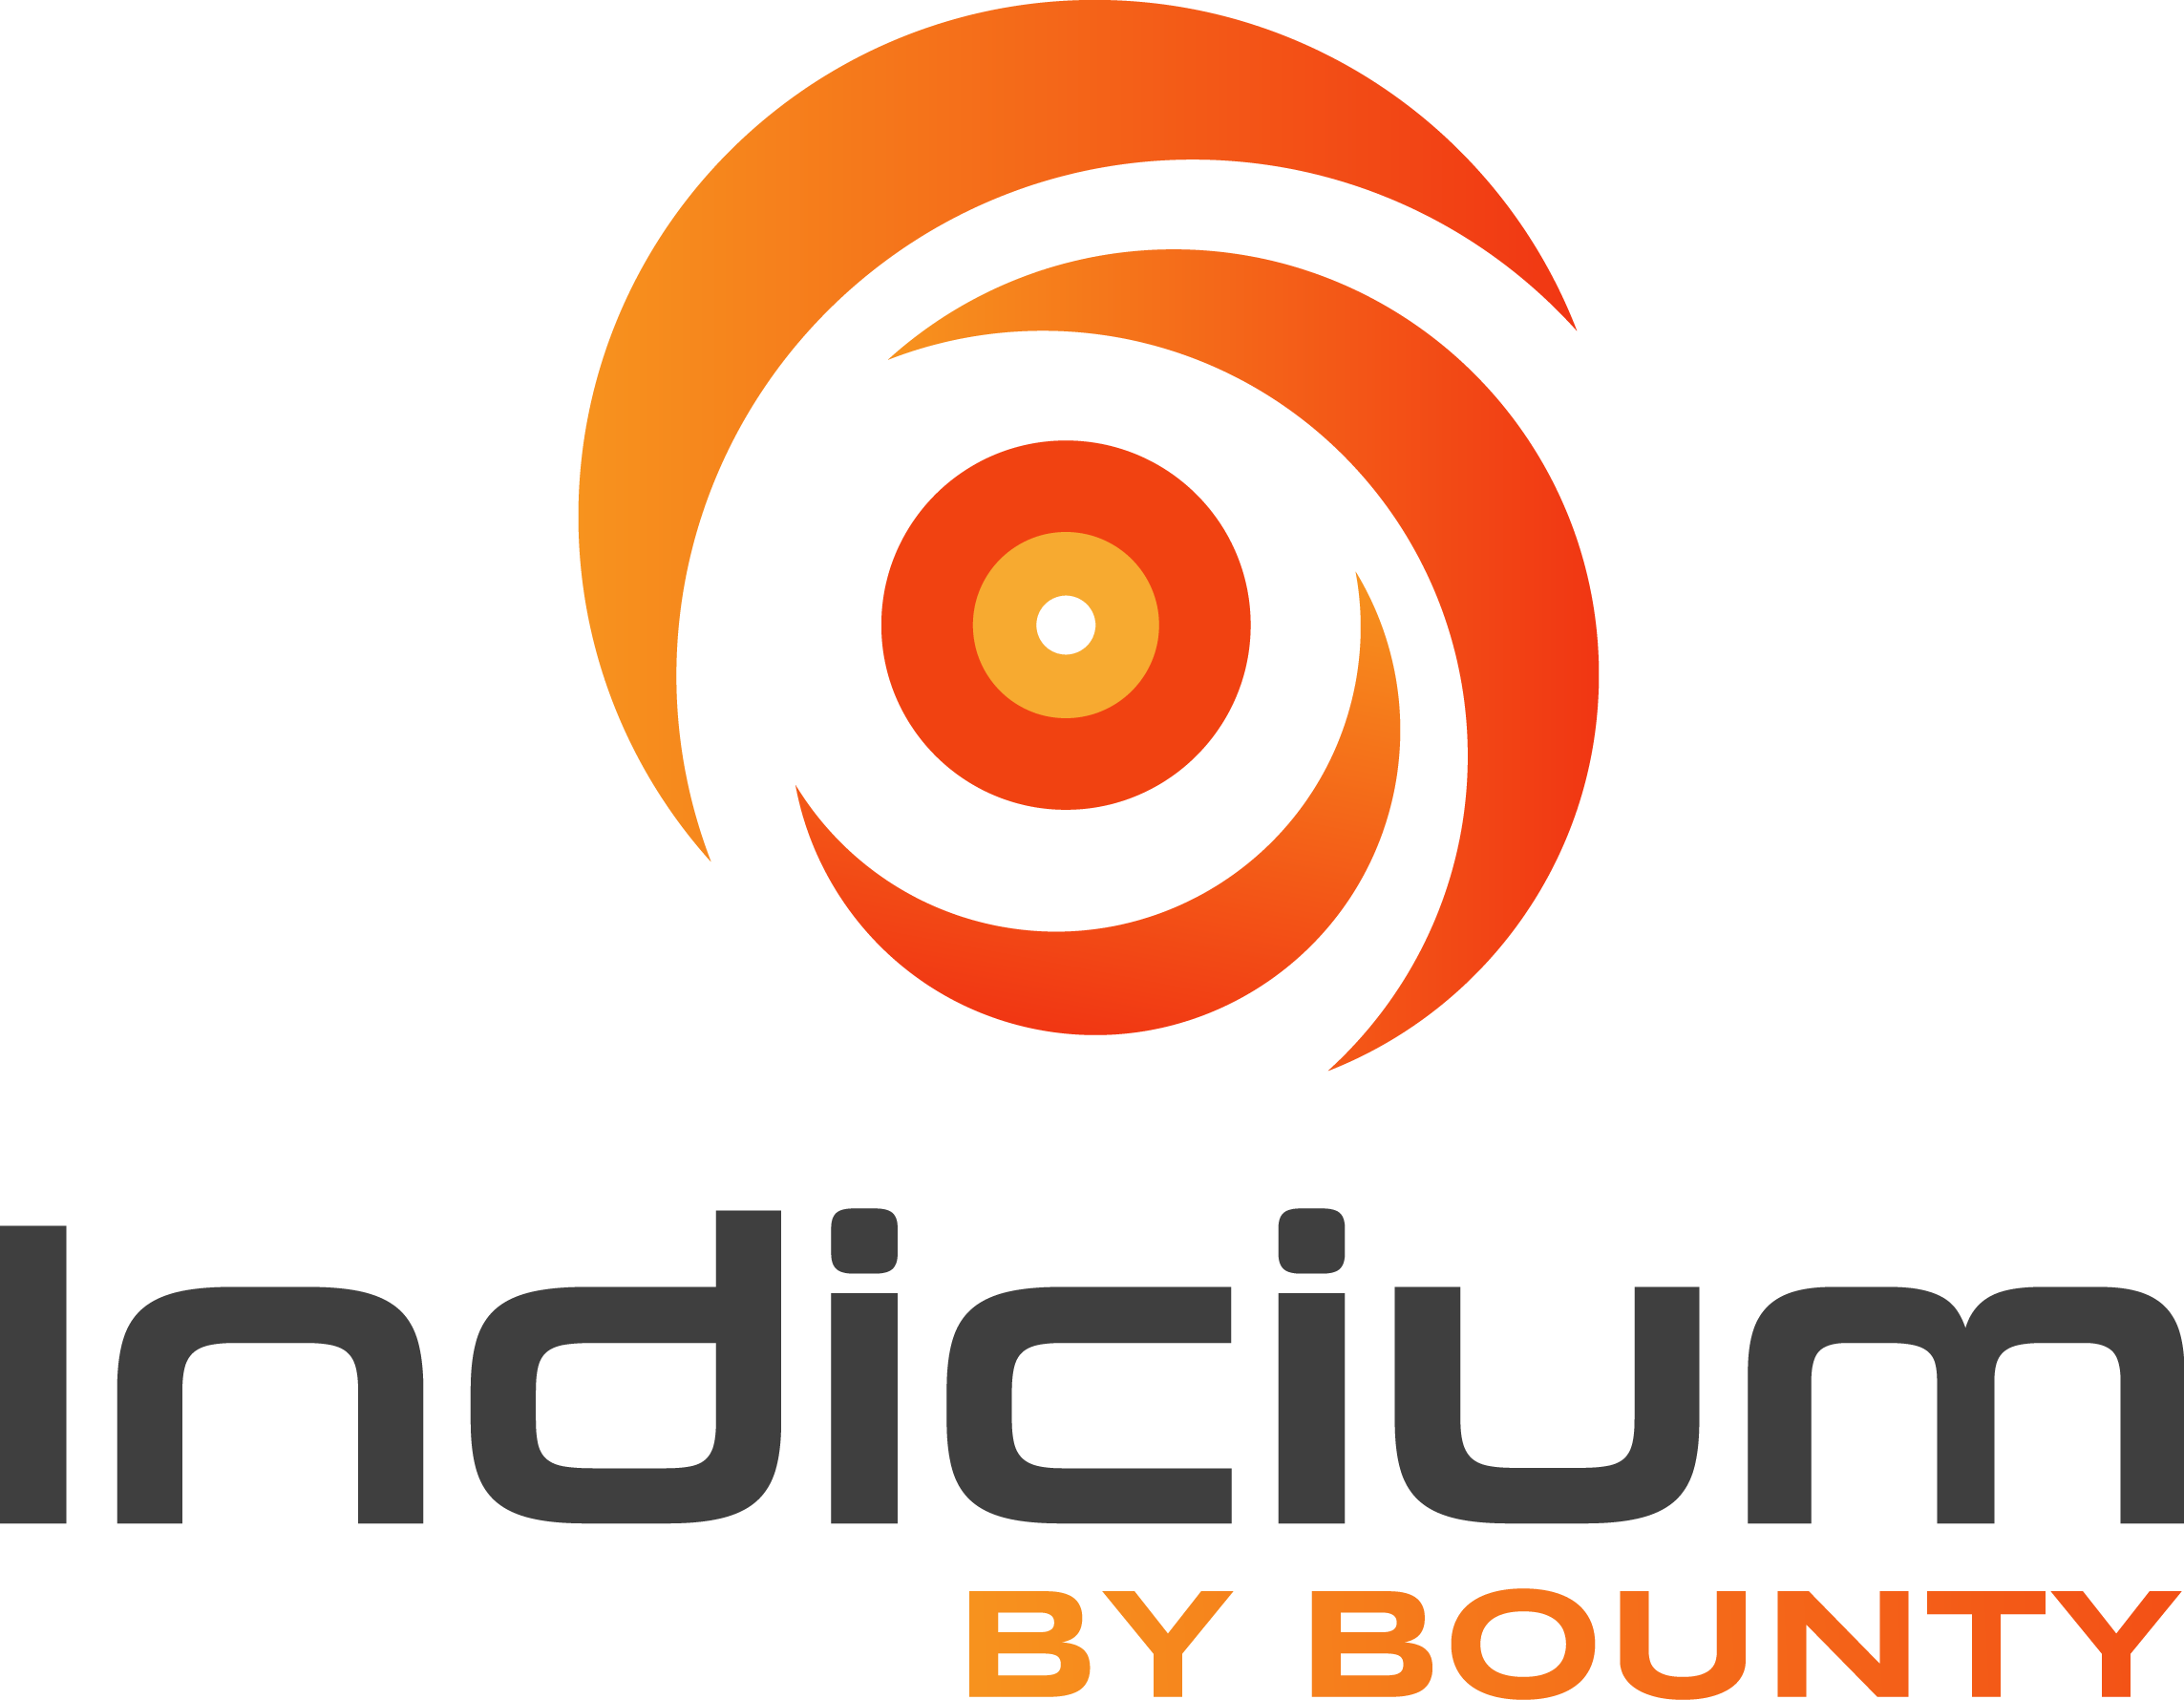 Bounty Logo - Indicium by Bounty | Making data count